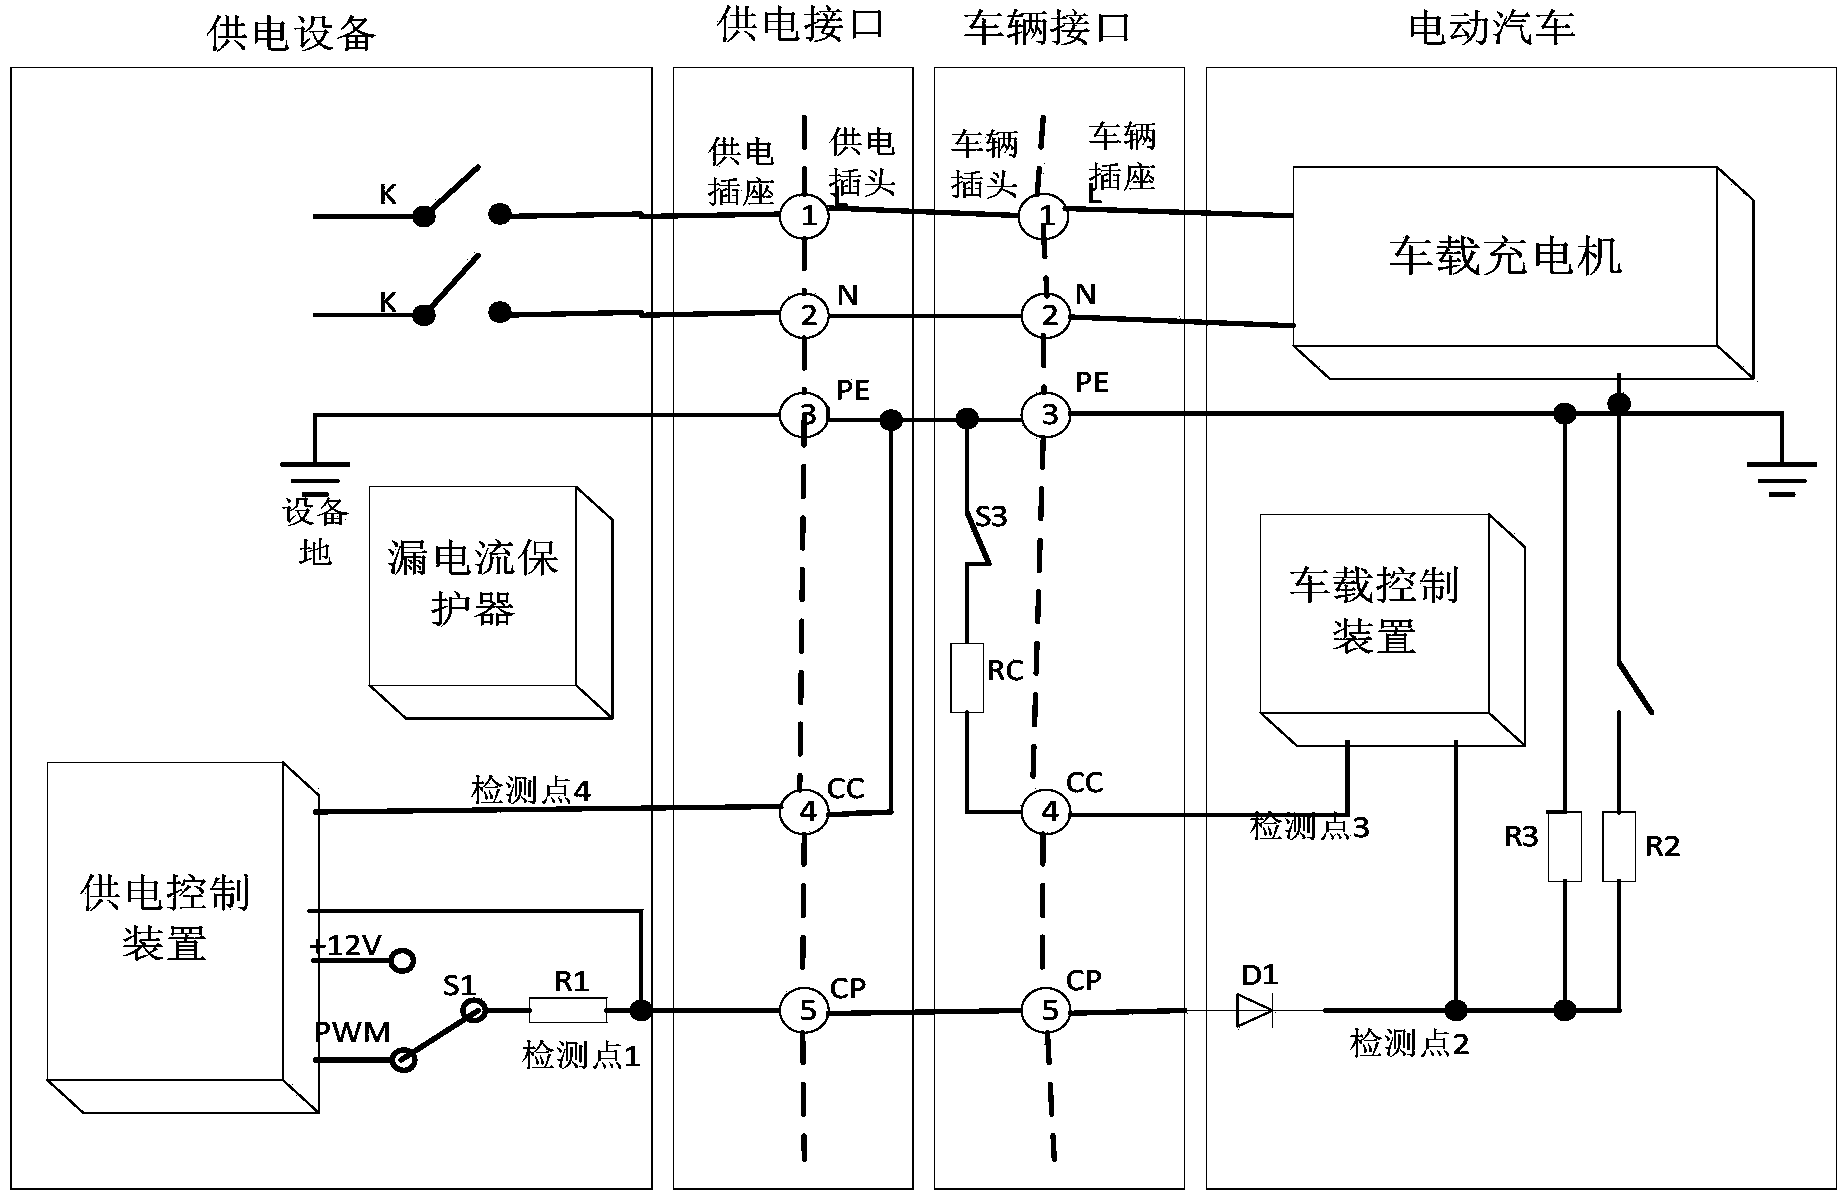 Self-adaptive charge control method based on wifi and applied to electric automobile